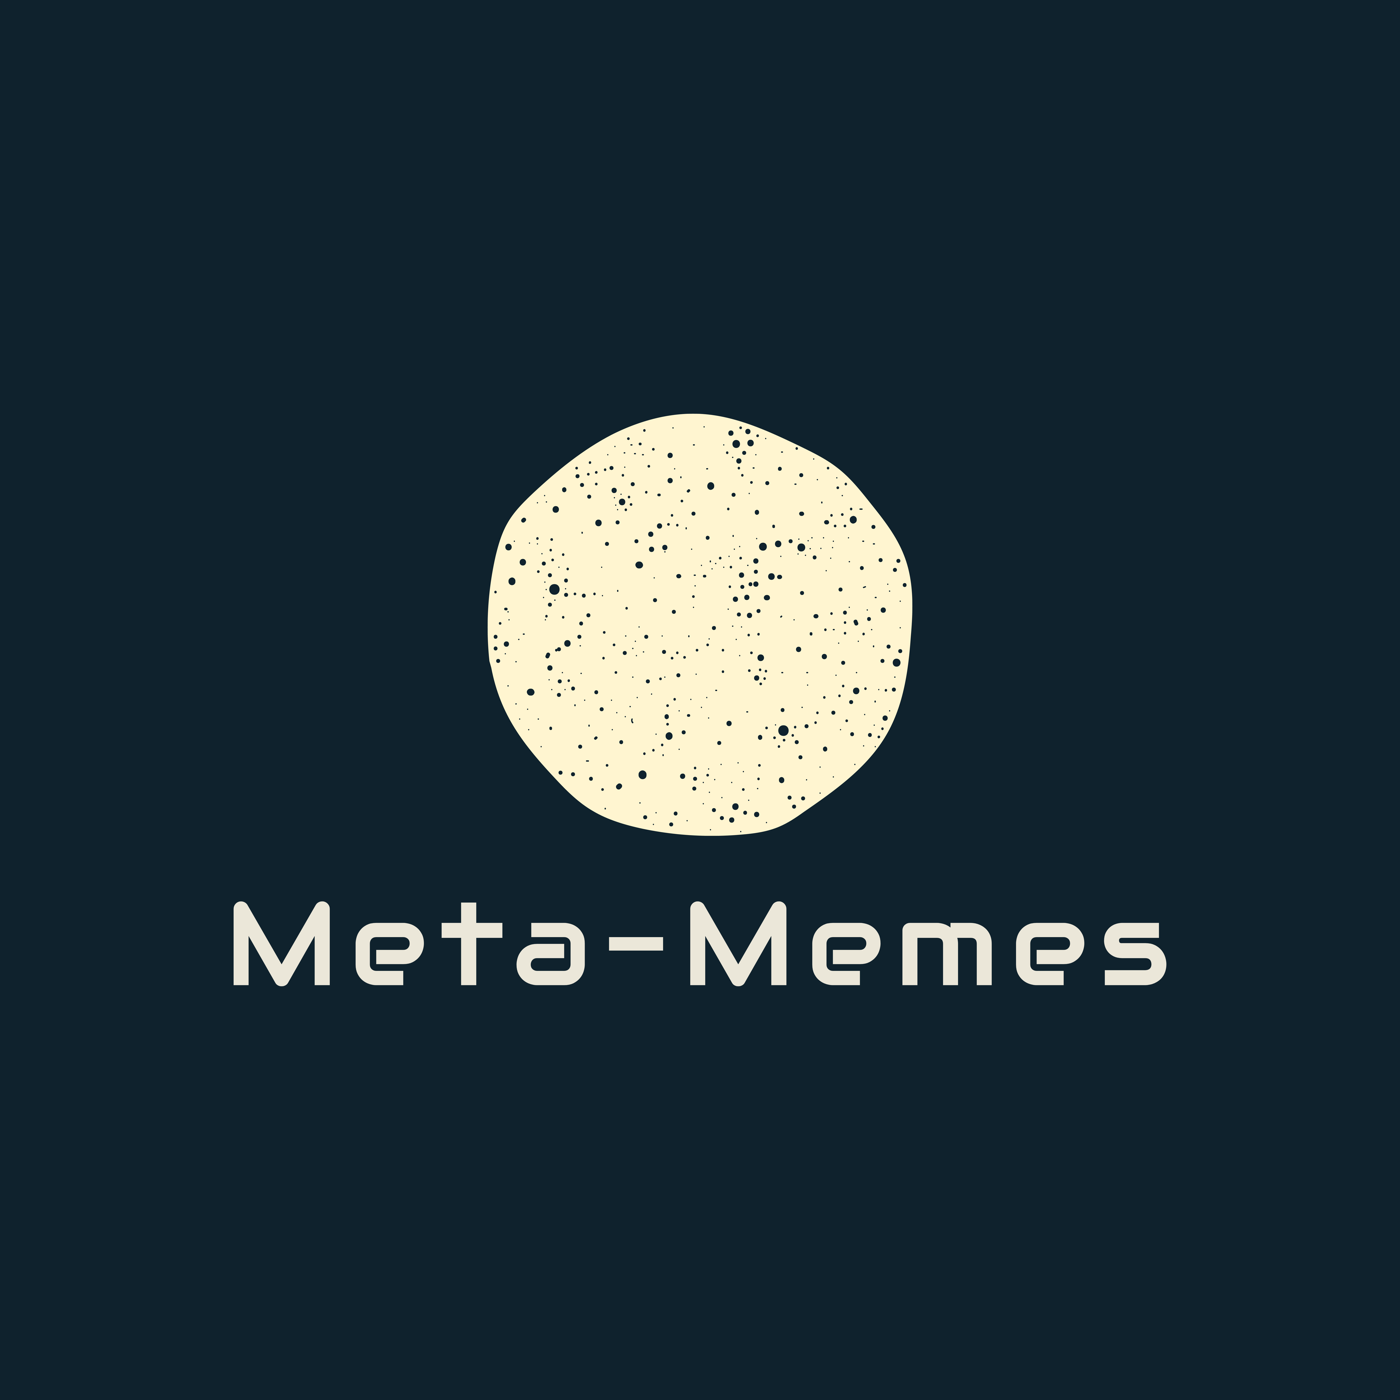 Pilot : Memes, the Universe and Everything